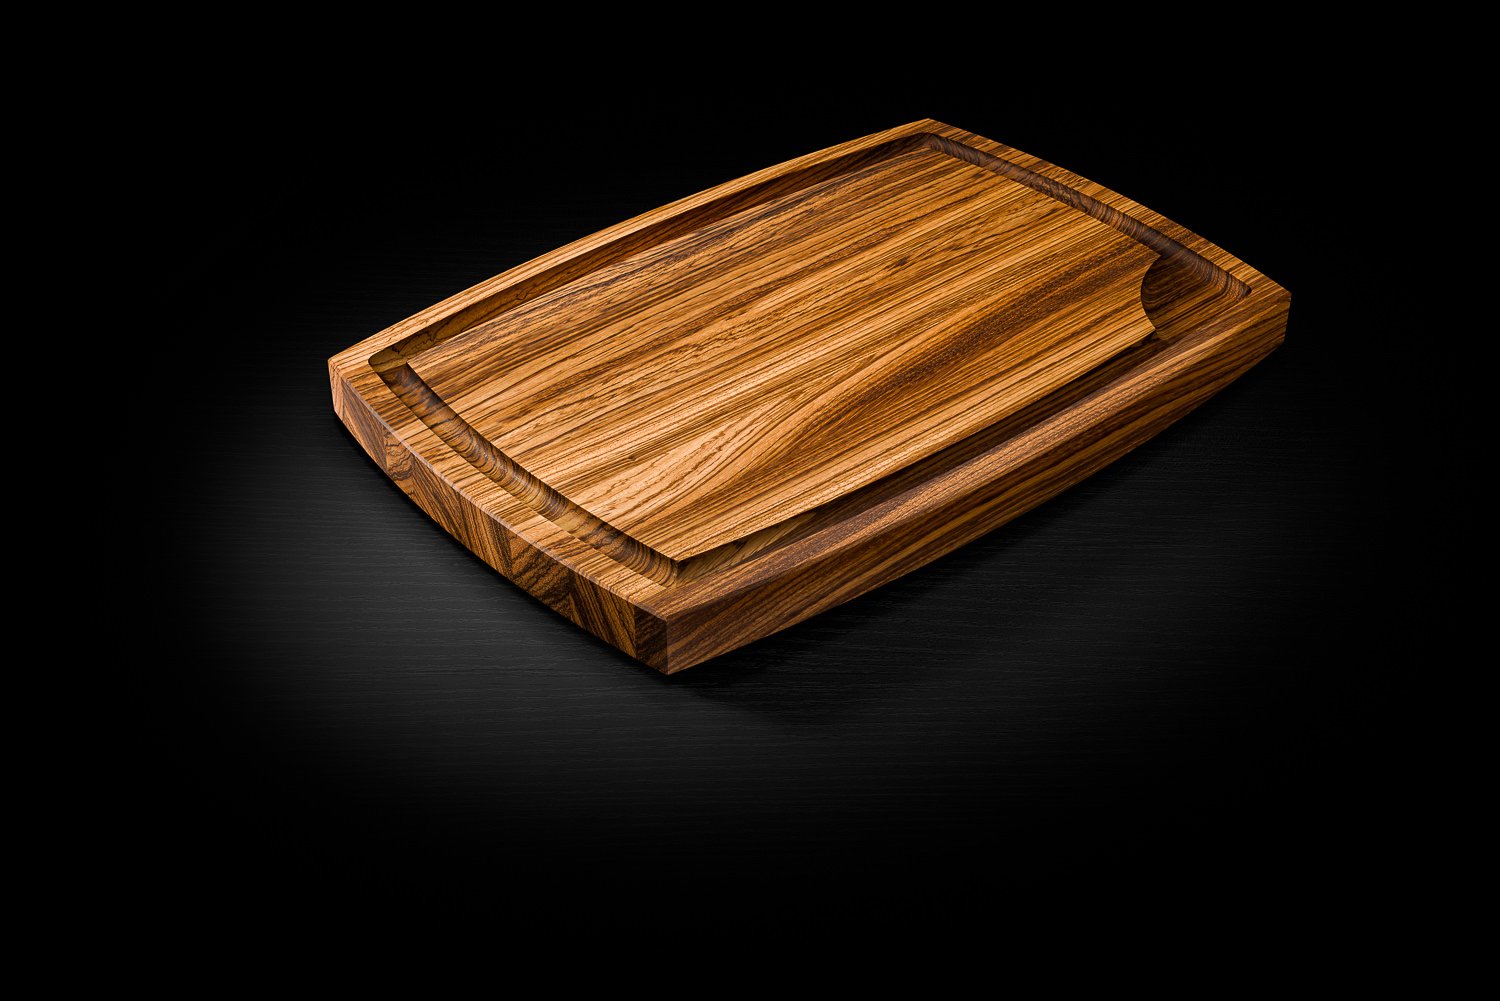 Chopping board olive wood rectangular large with juice groove